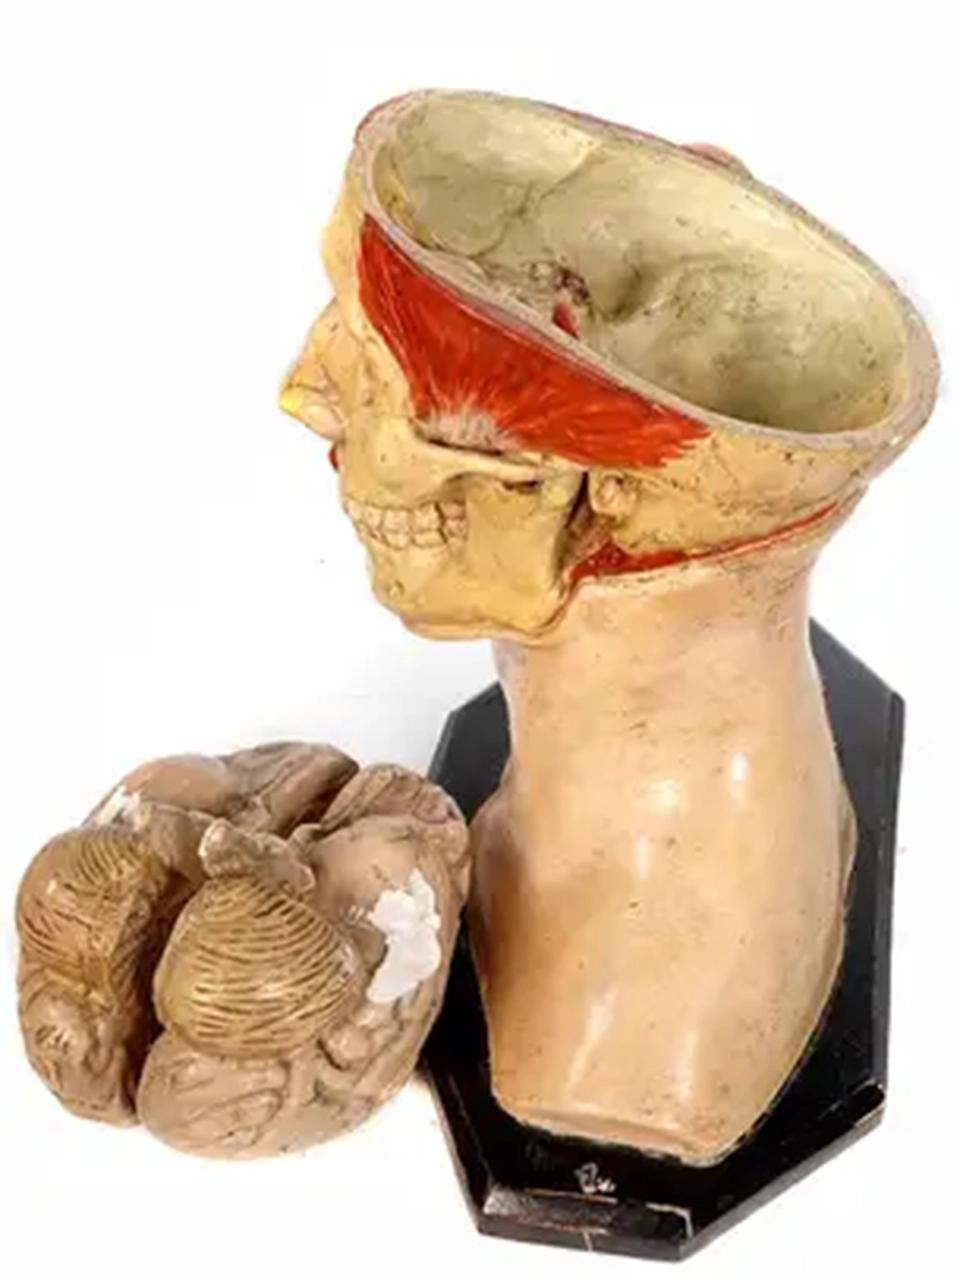 This is an early and high quality hand-painted plaster antique anatomical model of an adult human head. I would date this to 1900. The details are well-done and the brain is removable and splits in two. There is some plaster missing on the bottom of